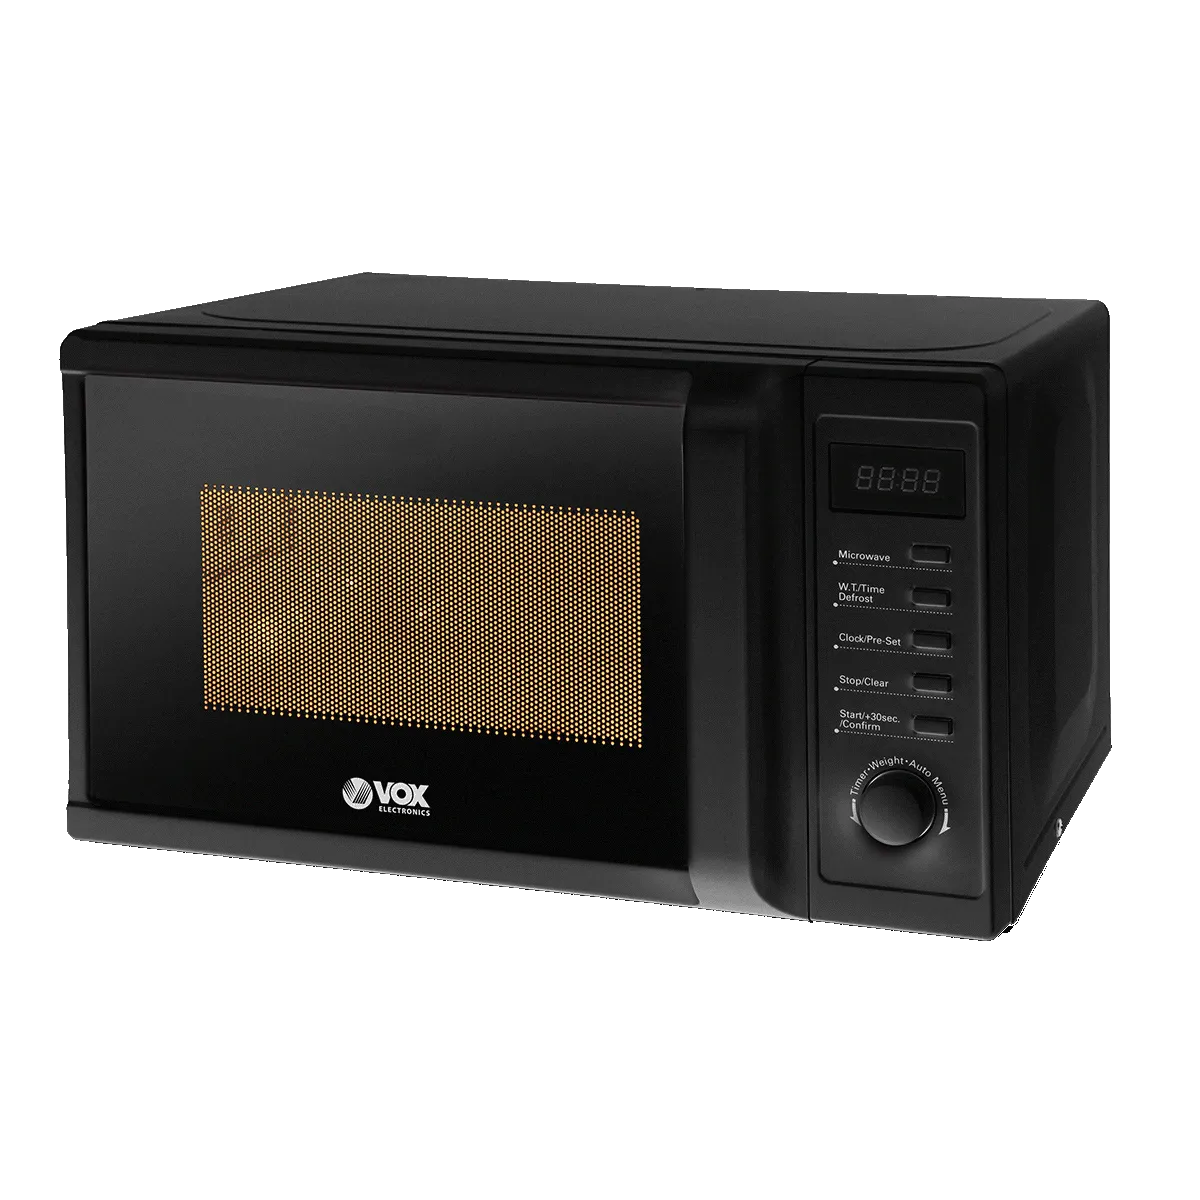 Microwave oven MWH-MD20B 